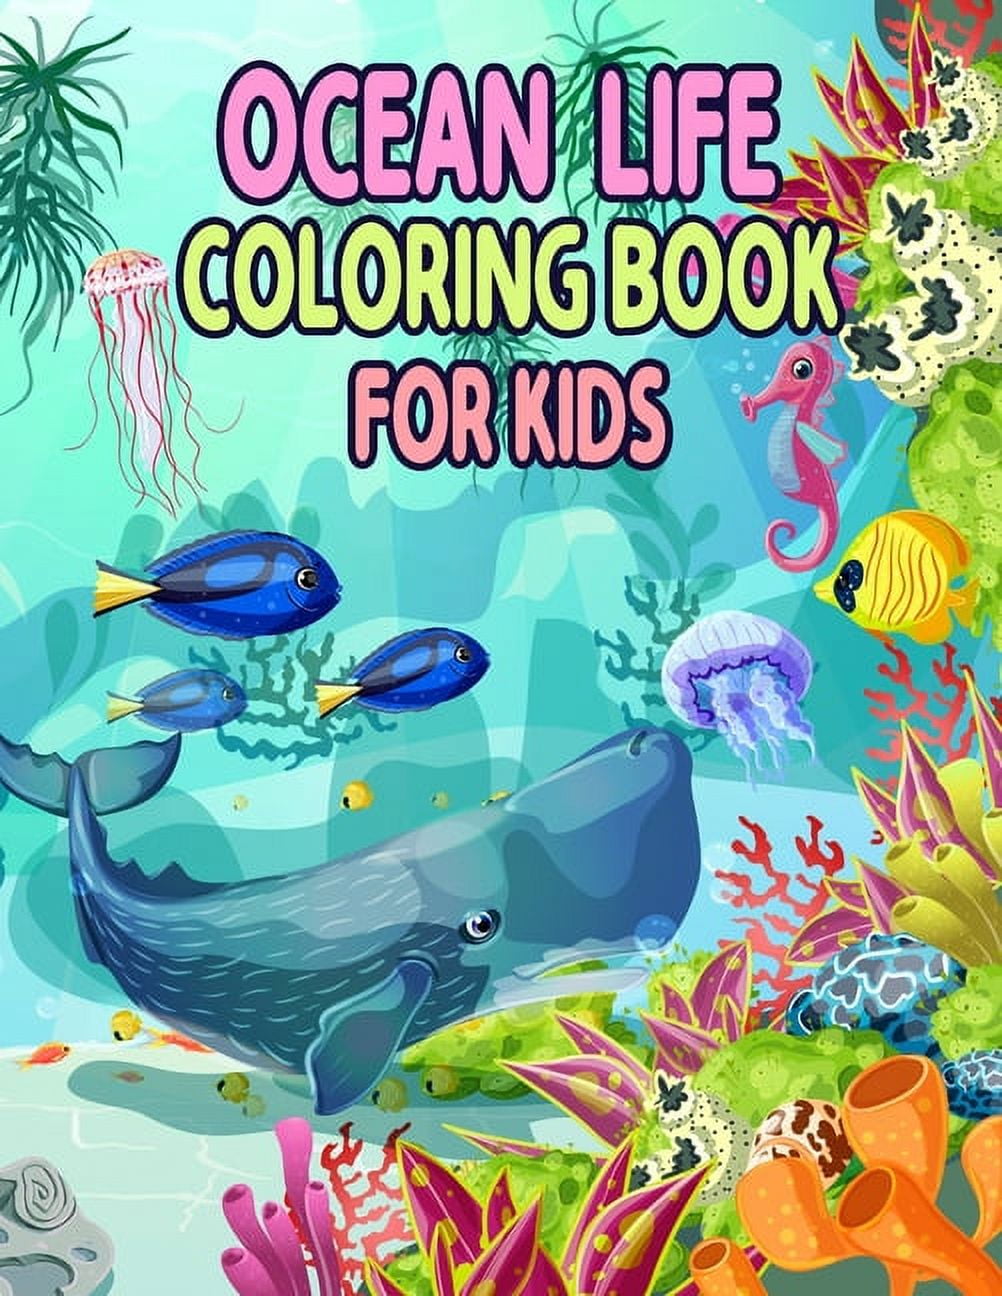 Super+Cute+Sea+Creatures+Coloring+Book+for+Kids+-+Coloring+Books+5+Year+Old+Edition+by+Activibooks+For+Kids+%282016%2C+Trade+Paperback%29  for sale online